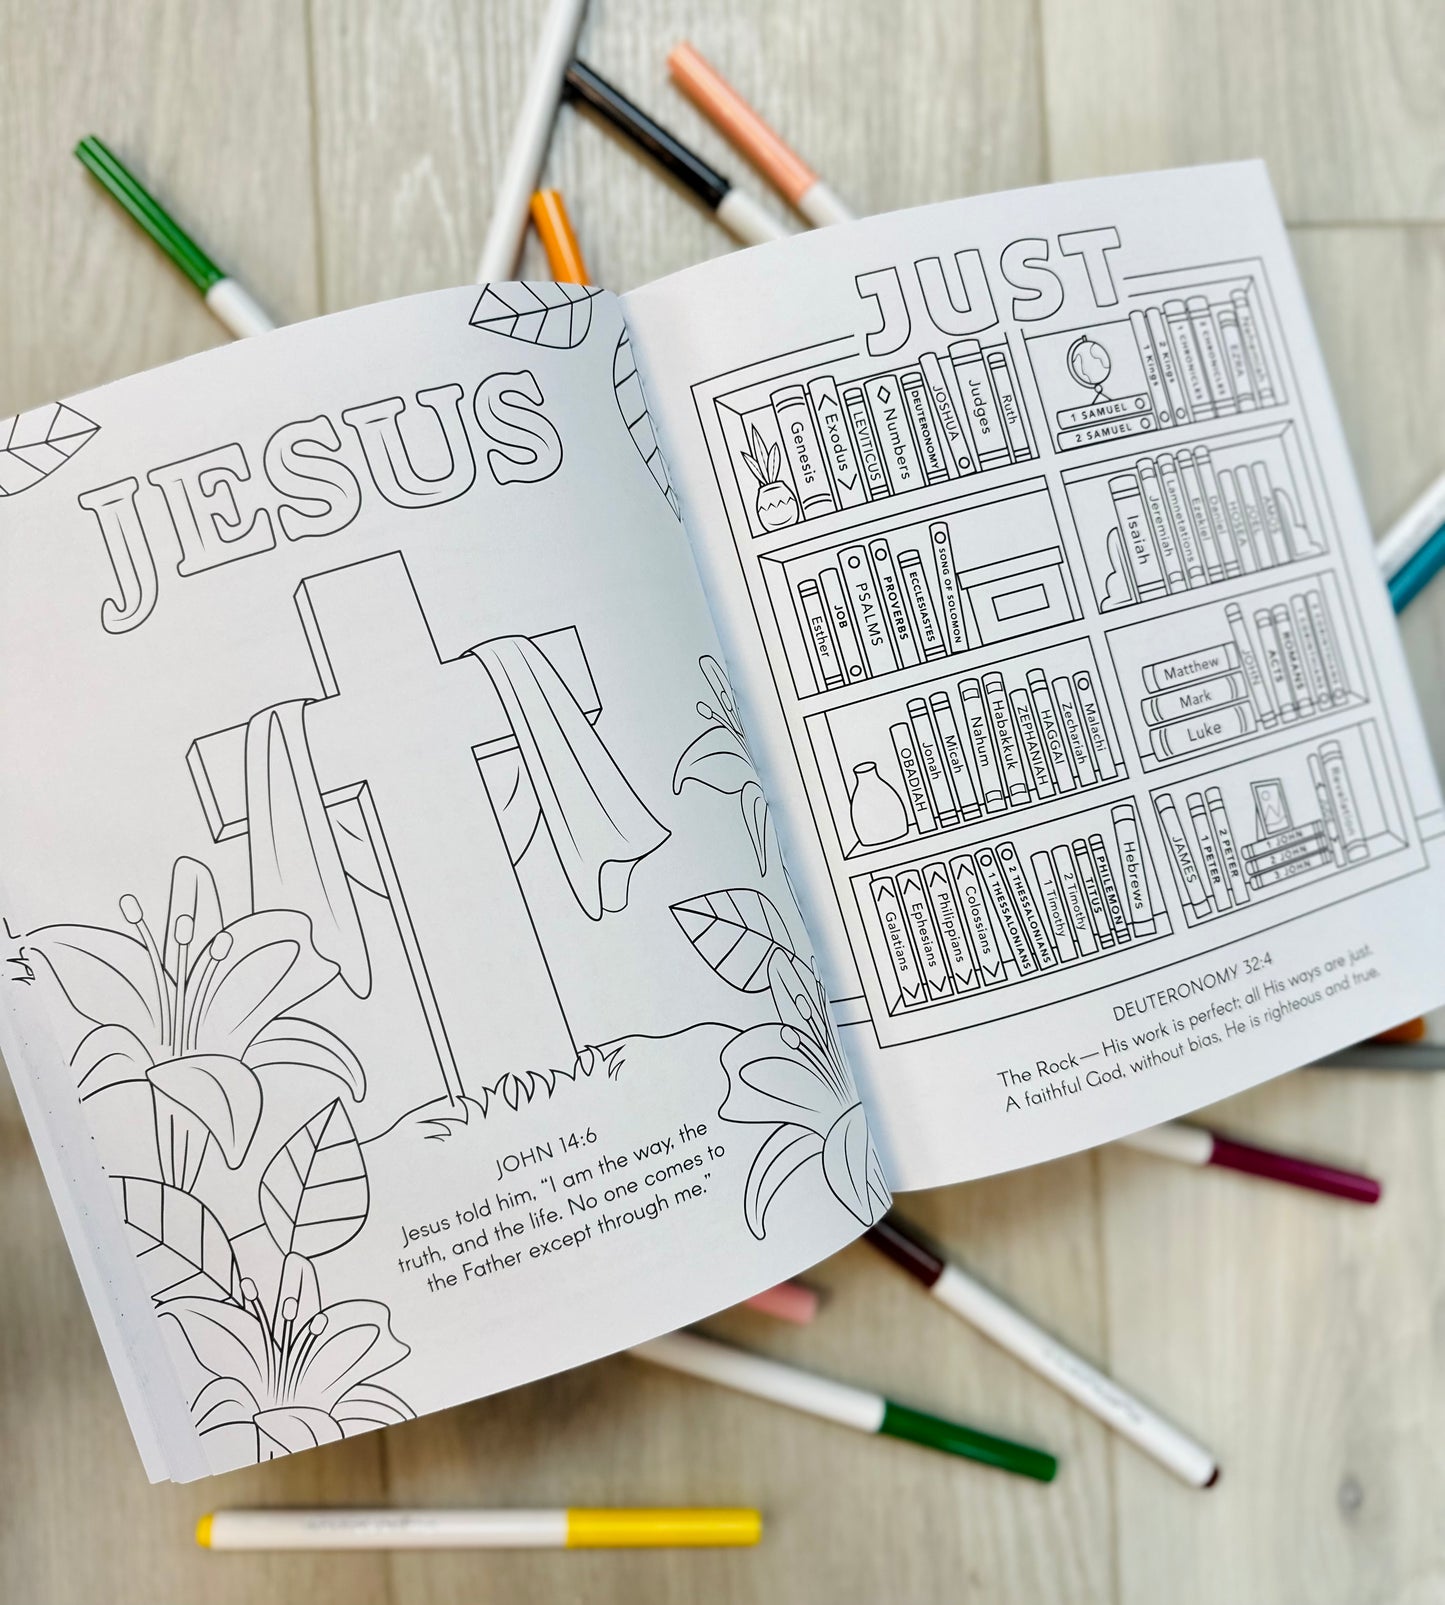 Colored with Grace-Kids Coloring Book